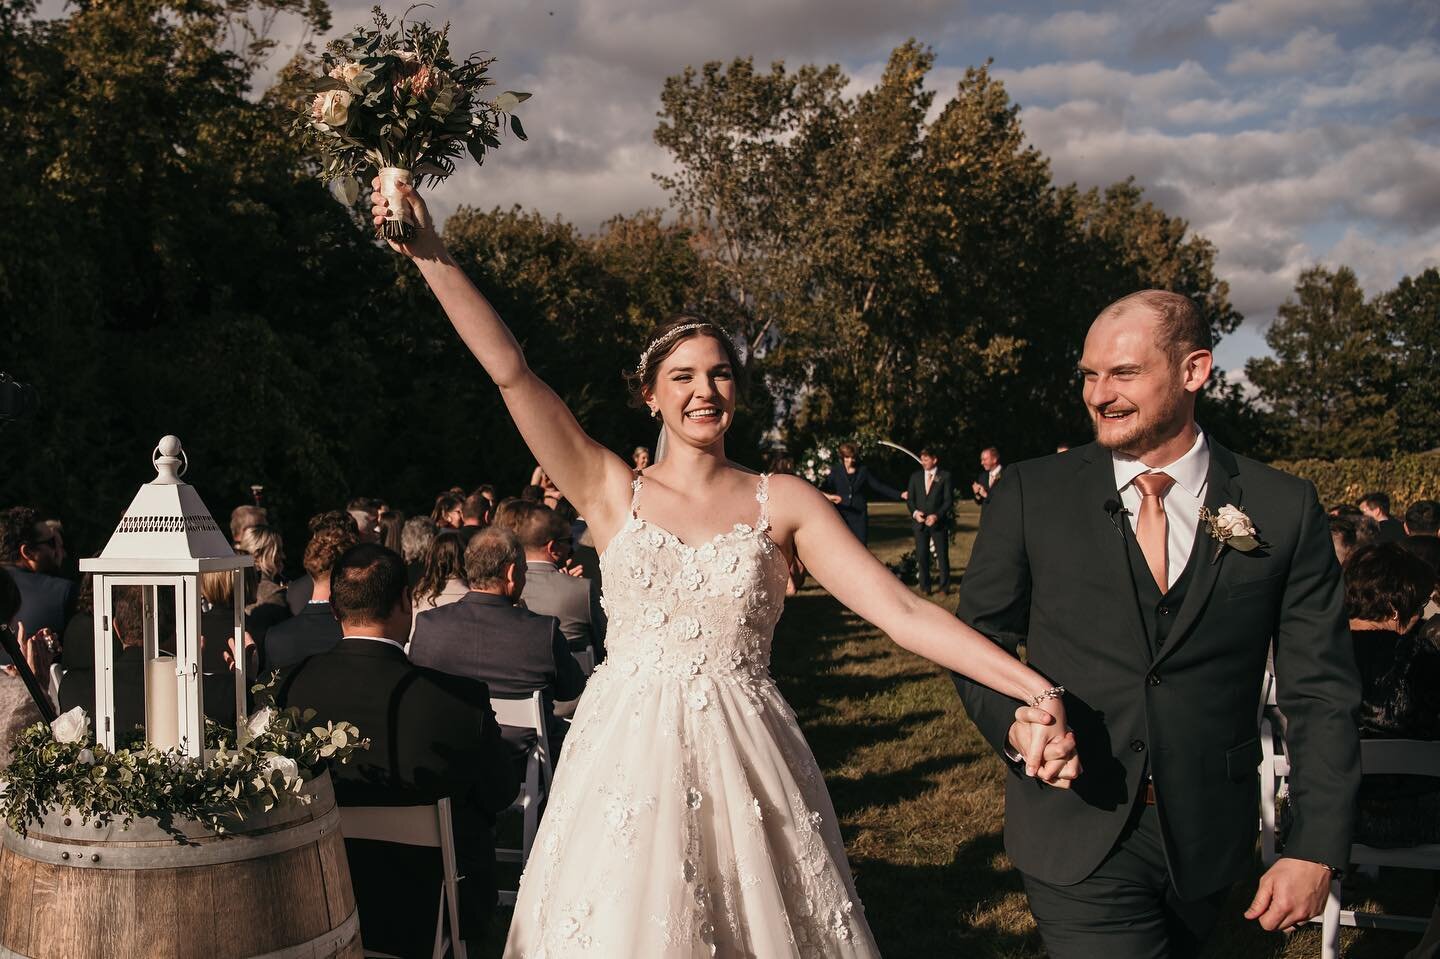 From contagious smiles to a captivating Slovak dance, S &amp; M radiated love and joy throughout &ndash; a celebration of pure happiness 💕

@peleewinery 
@jolieproductions 
@flowersbydesignwindsor 
@djqriusgeorge 
@blurthelinefilm 
📸 @yw.photos.by.